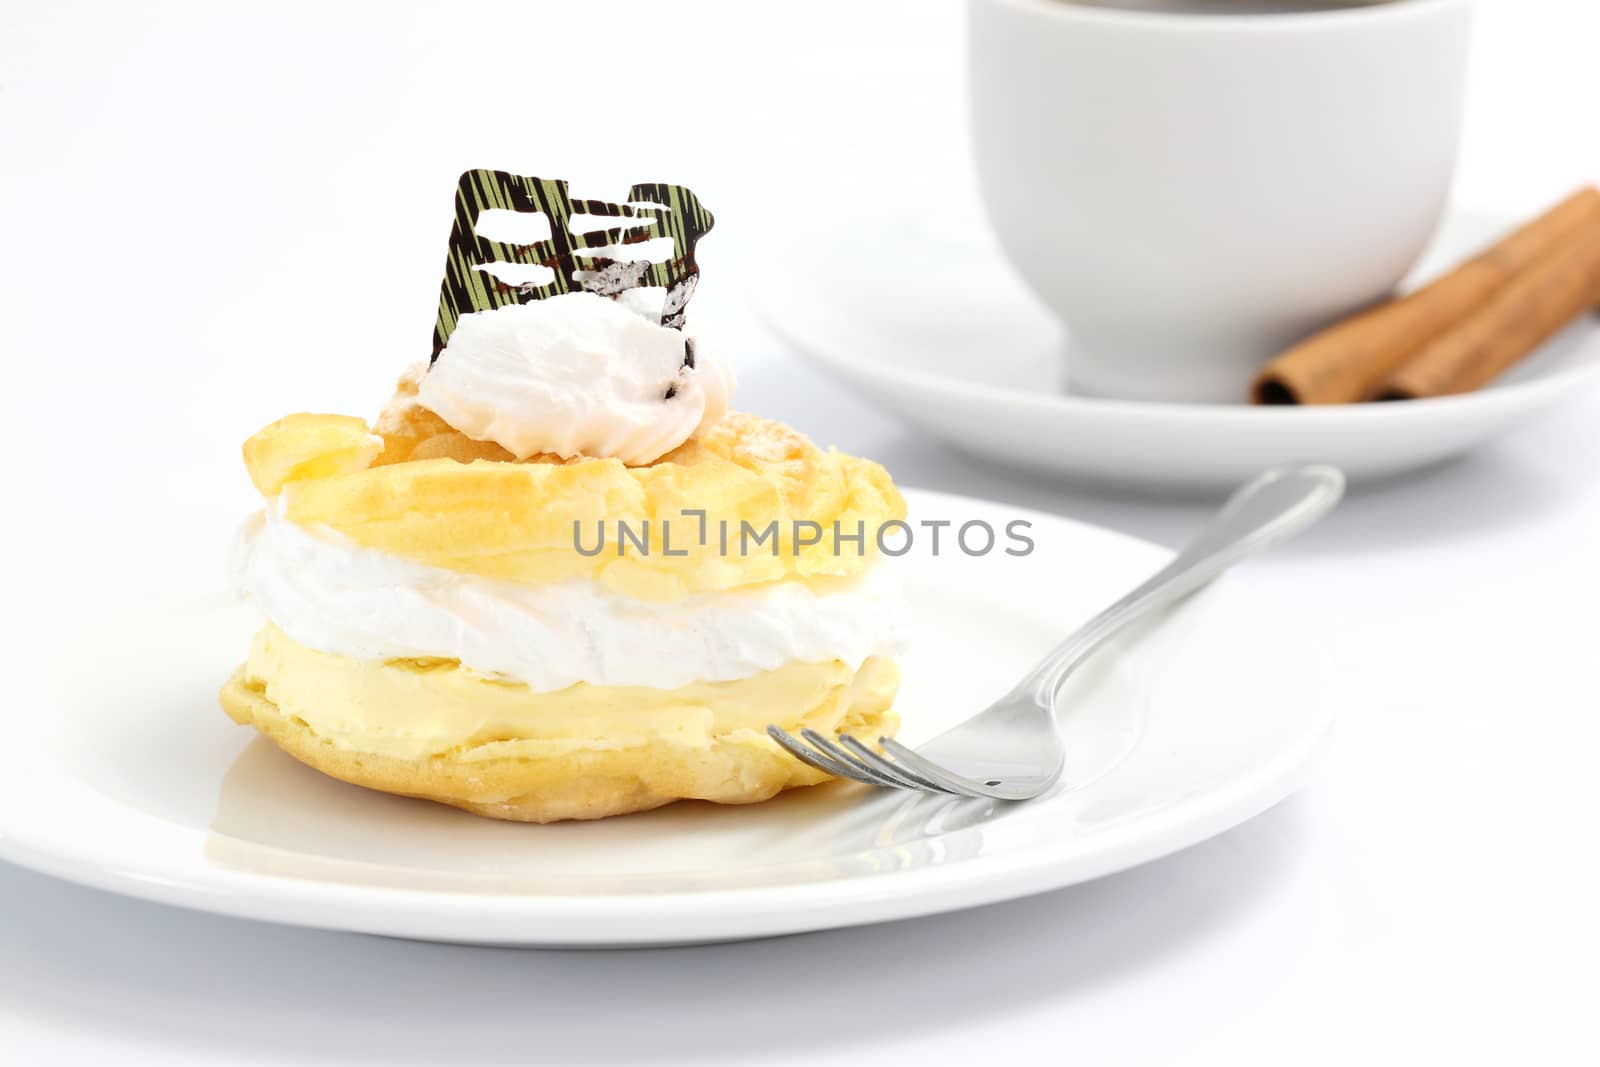 Cream puff cake Dessert and coffee isolated in white background